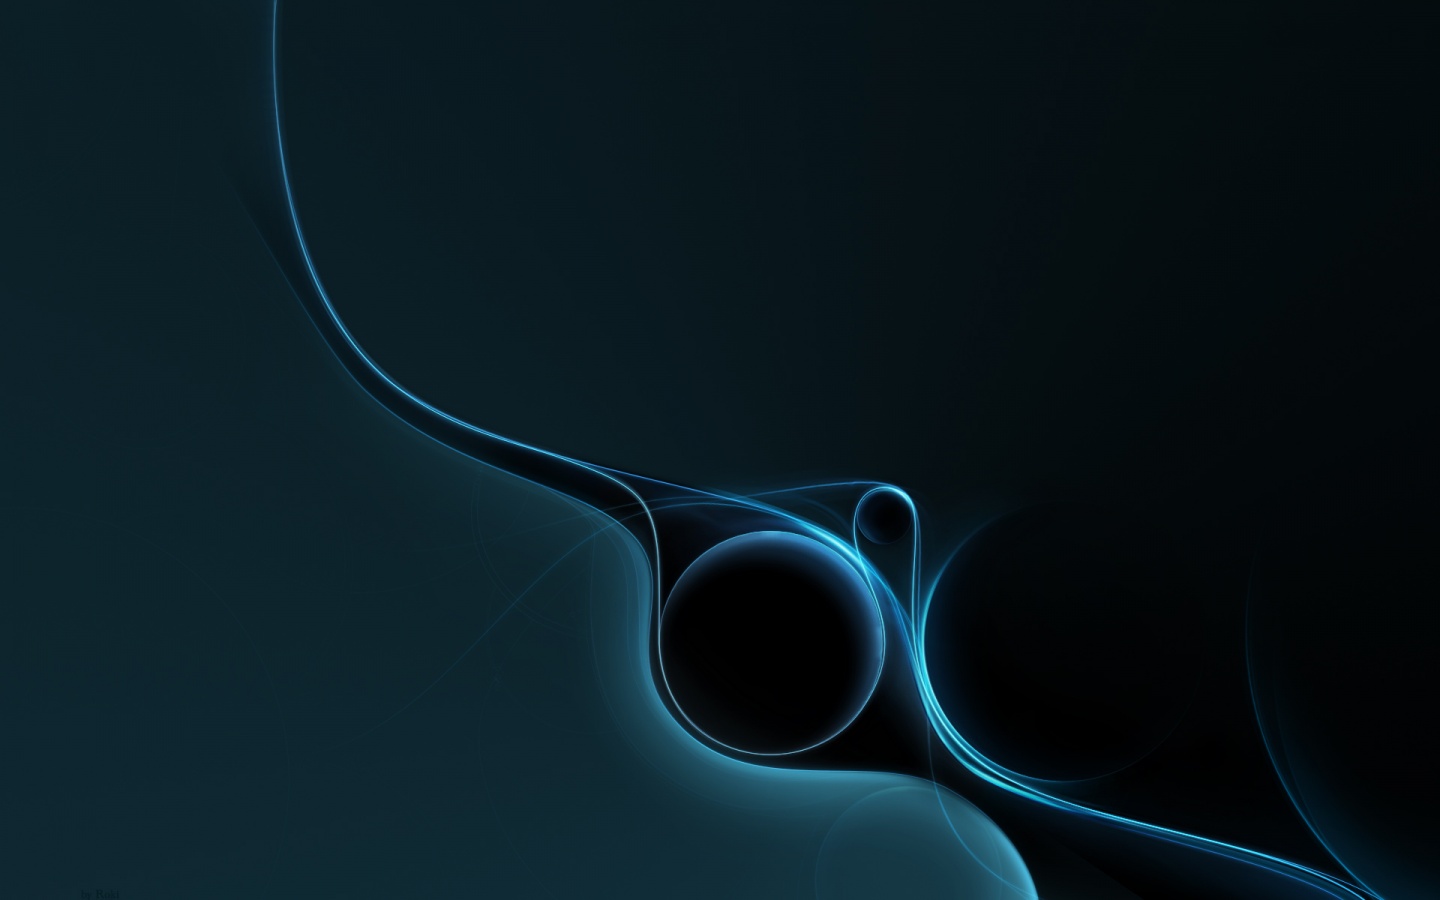  Windows 8 Background Abstract Blue Curves Windows 8 Wallpaper x 1440x900